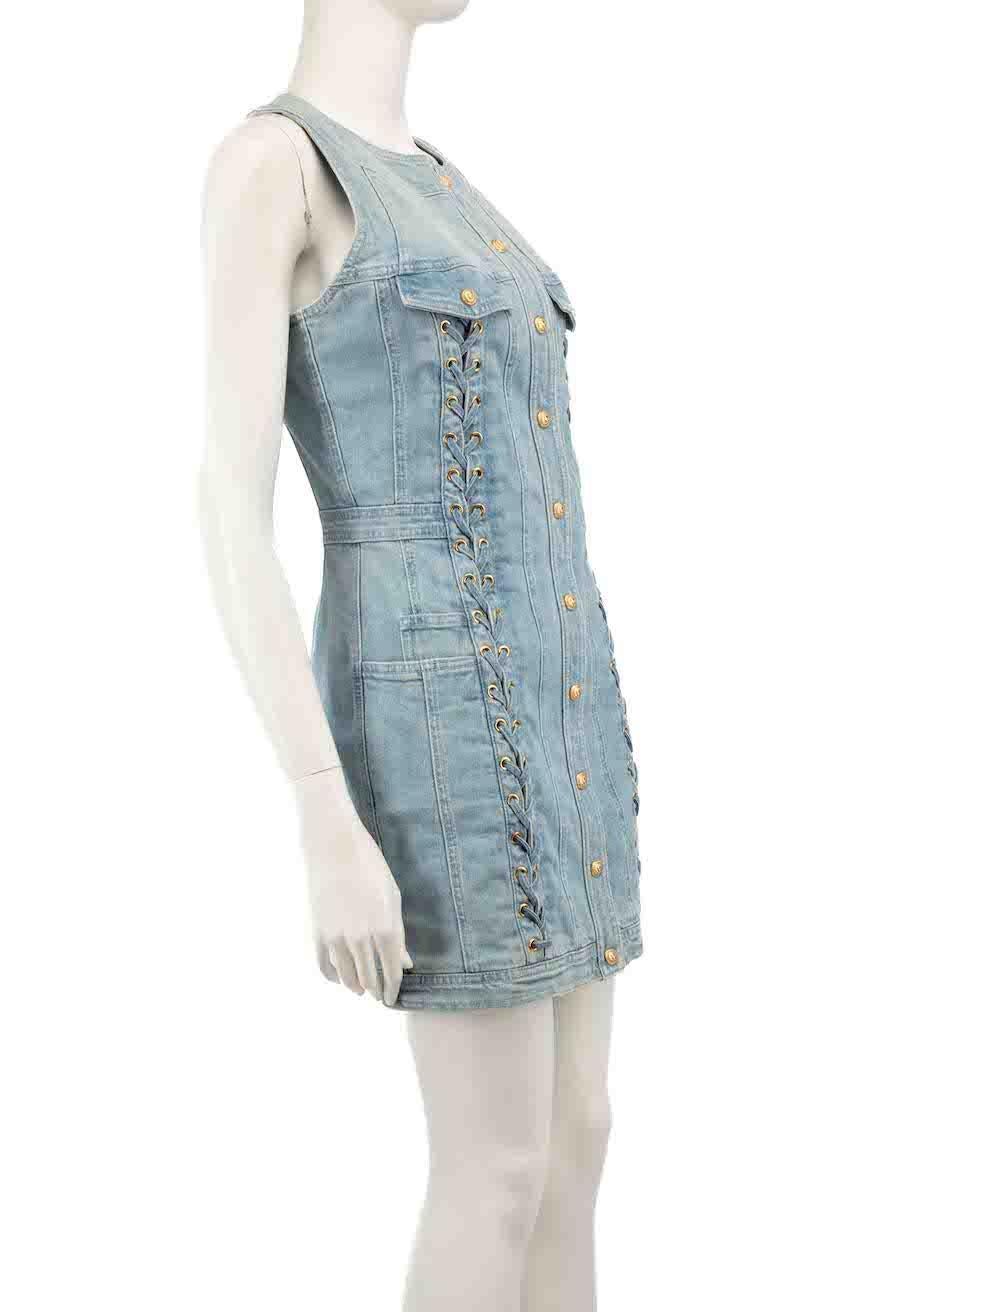 CONDITION is Very good. Minimal wear to dress is evident. Some marks and discolouration on the inside lining and the denim outer fabric. There is some tarnishing to the metal hardware on this used Balmain designer resale item.
